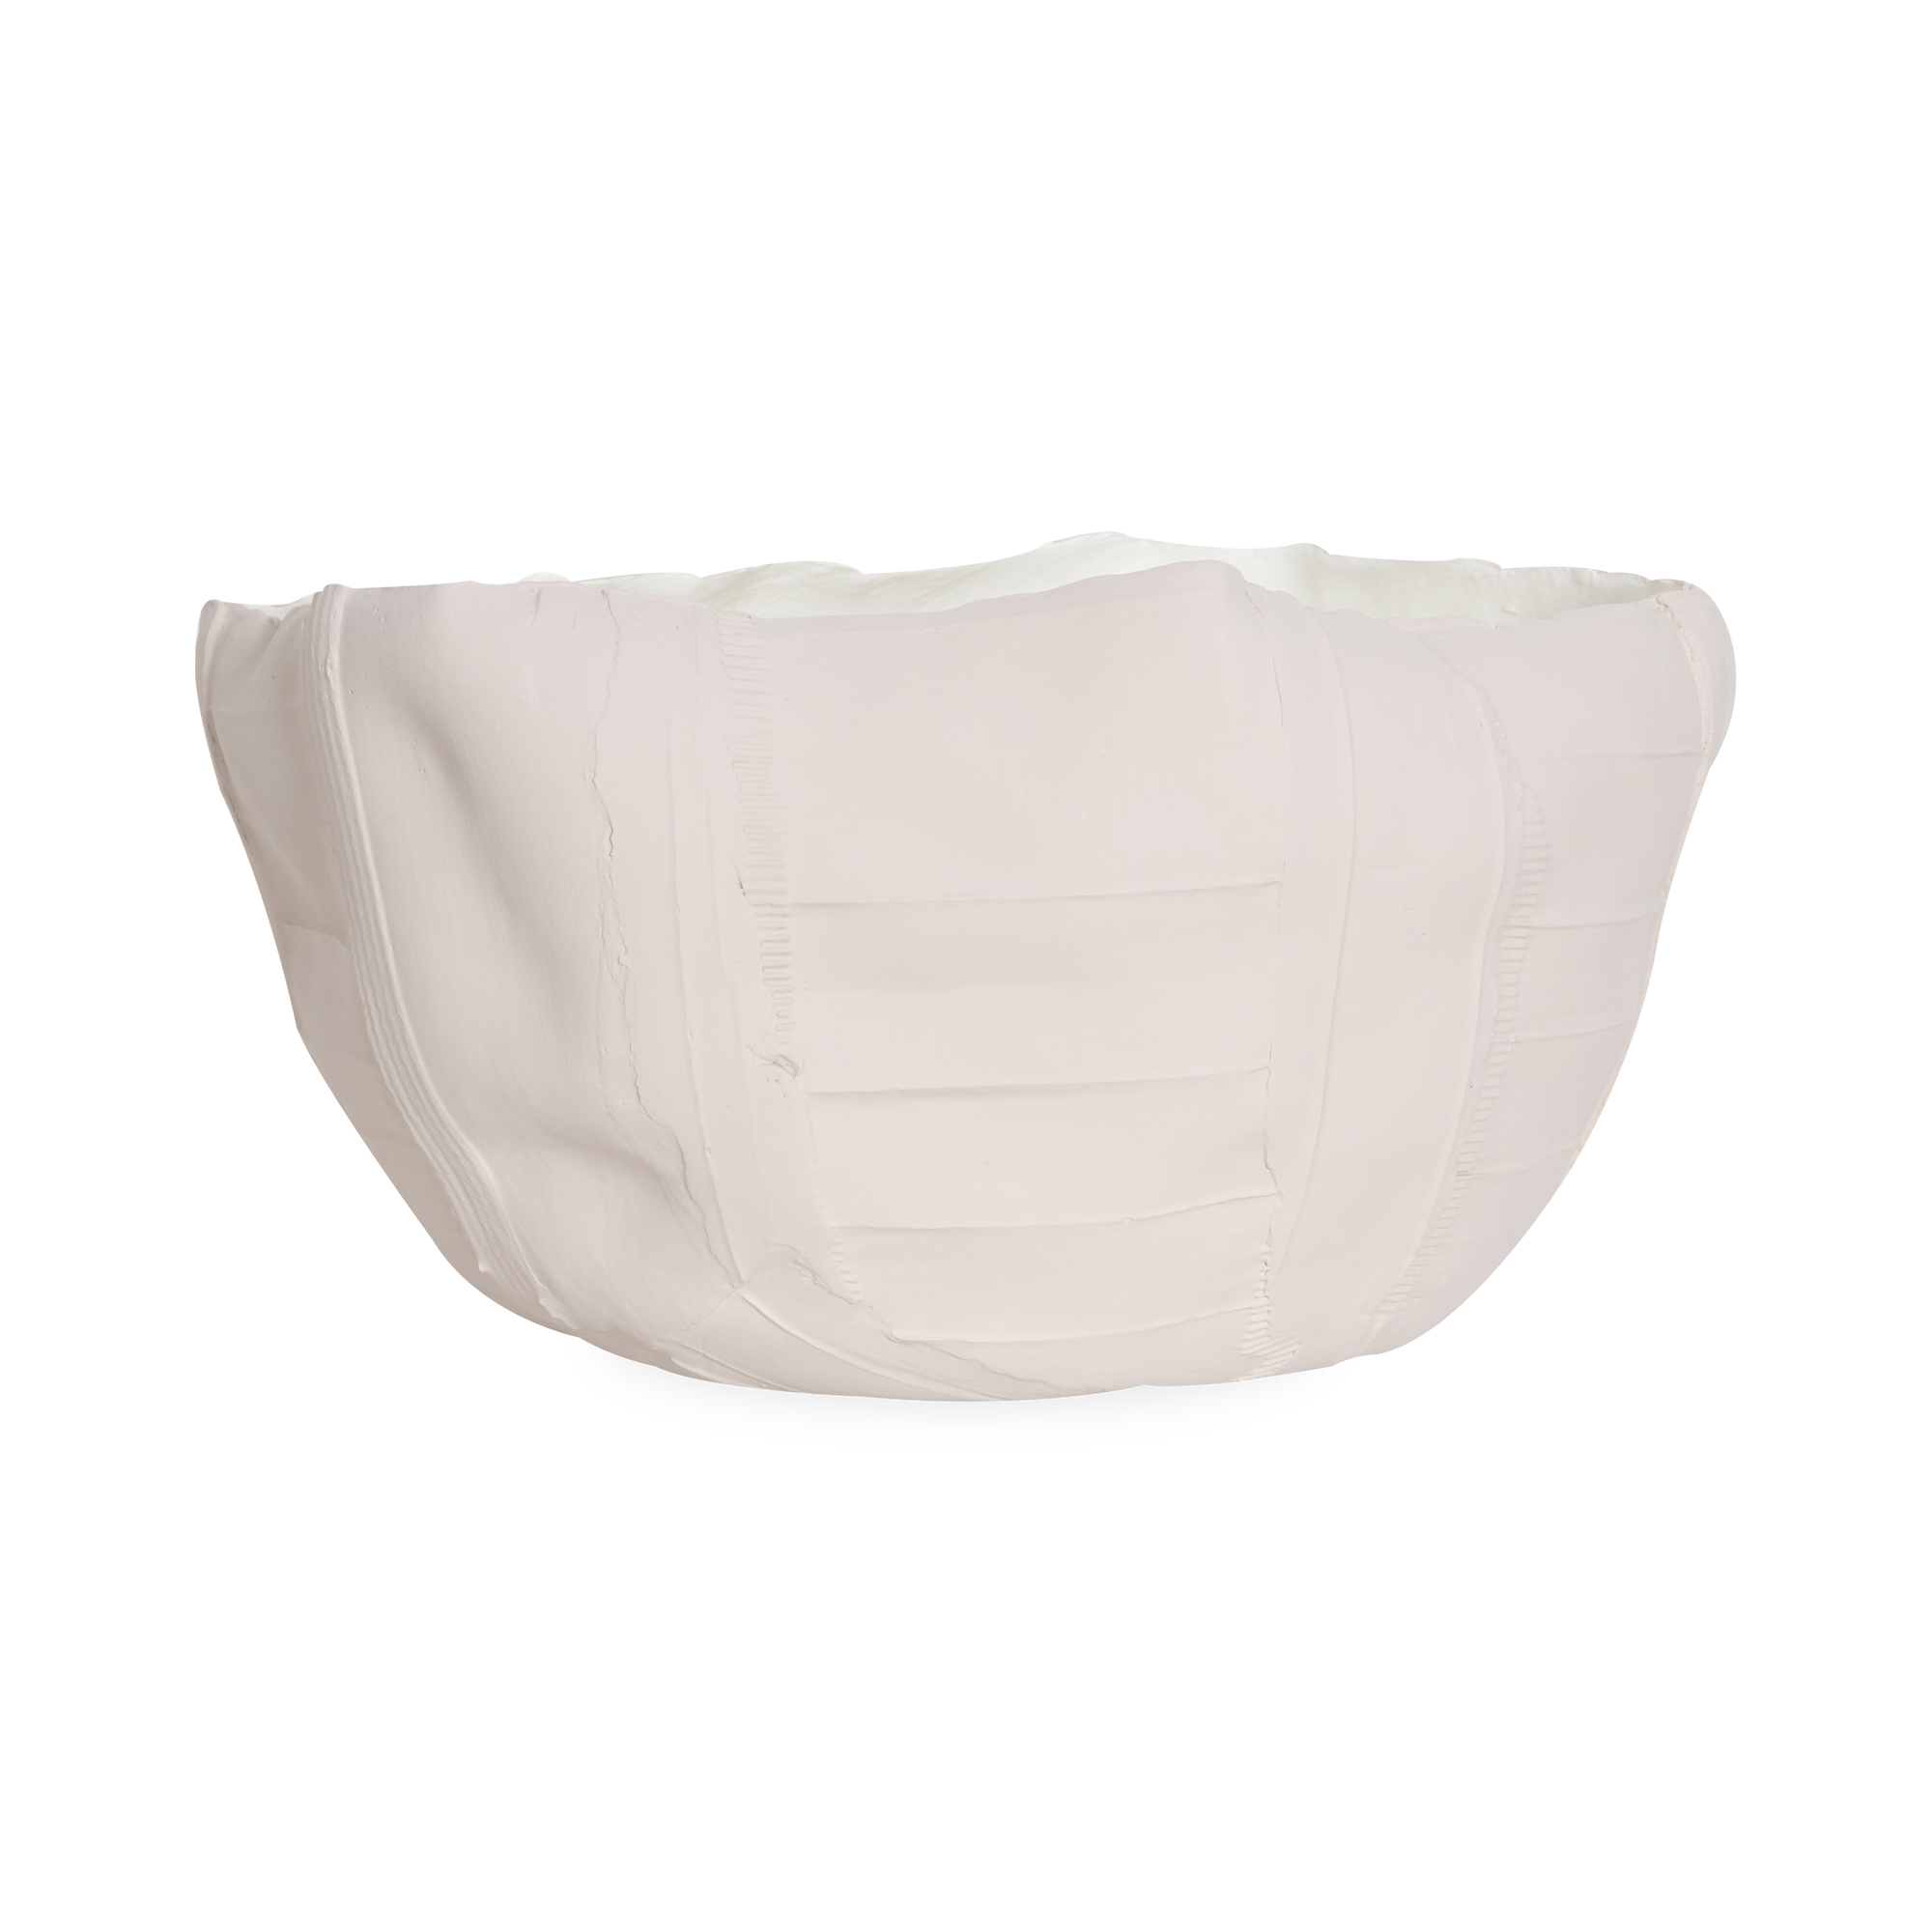 With a captivating sculptural silhouette and a truly elegant texture that dances with the light of the day, the Corteccia Bowl embraces imperfection and asymmetry.